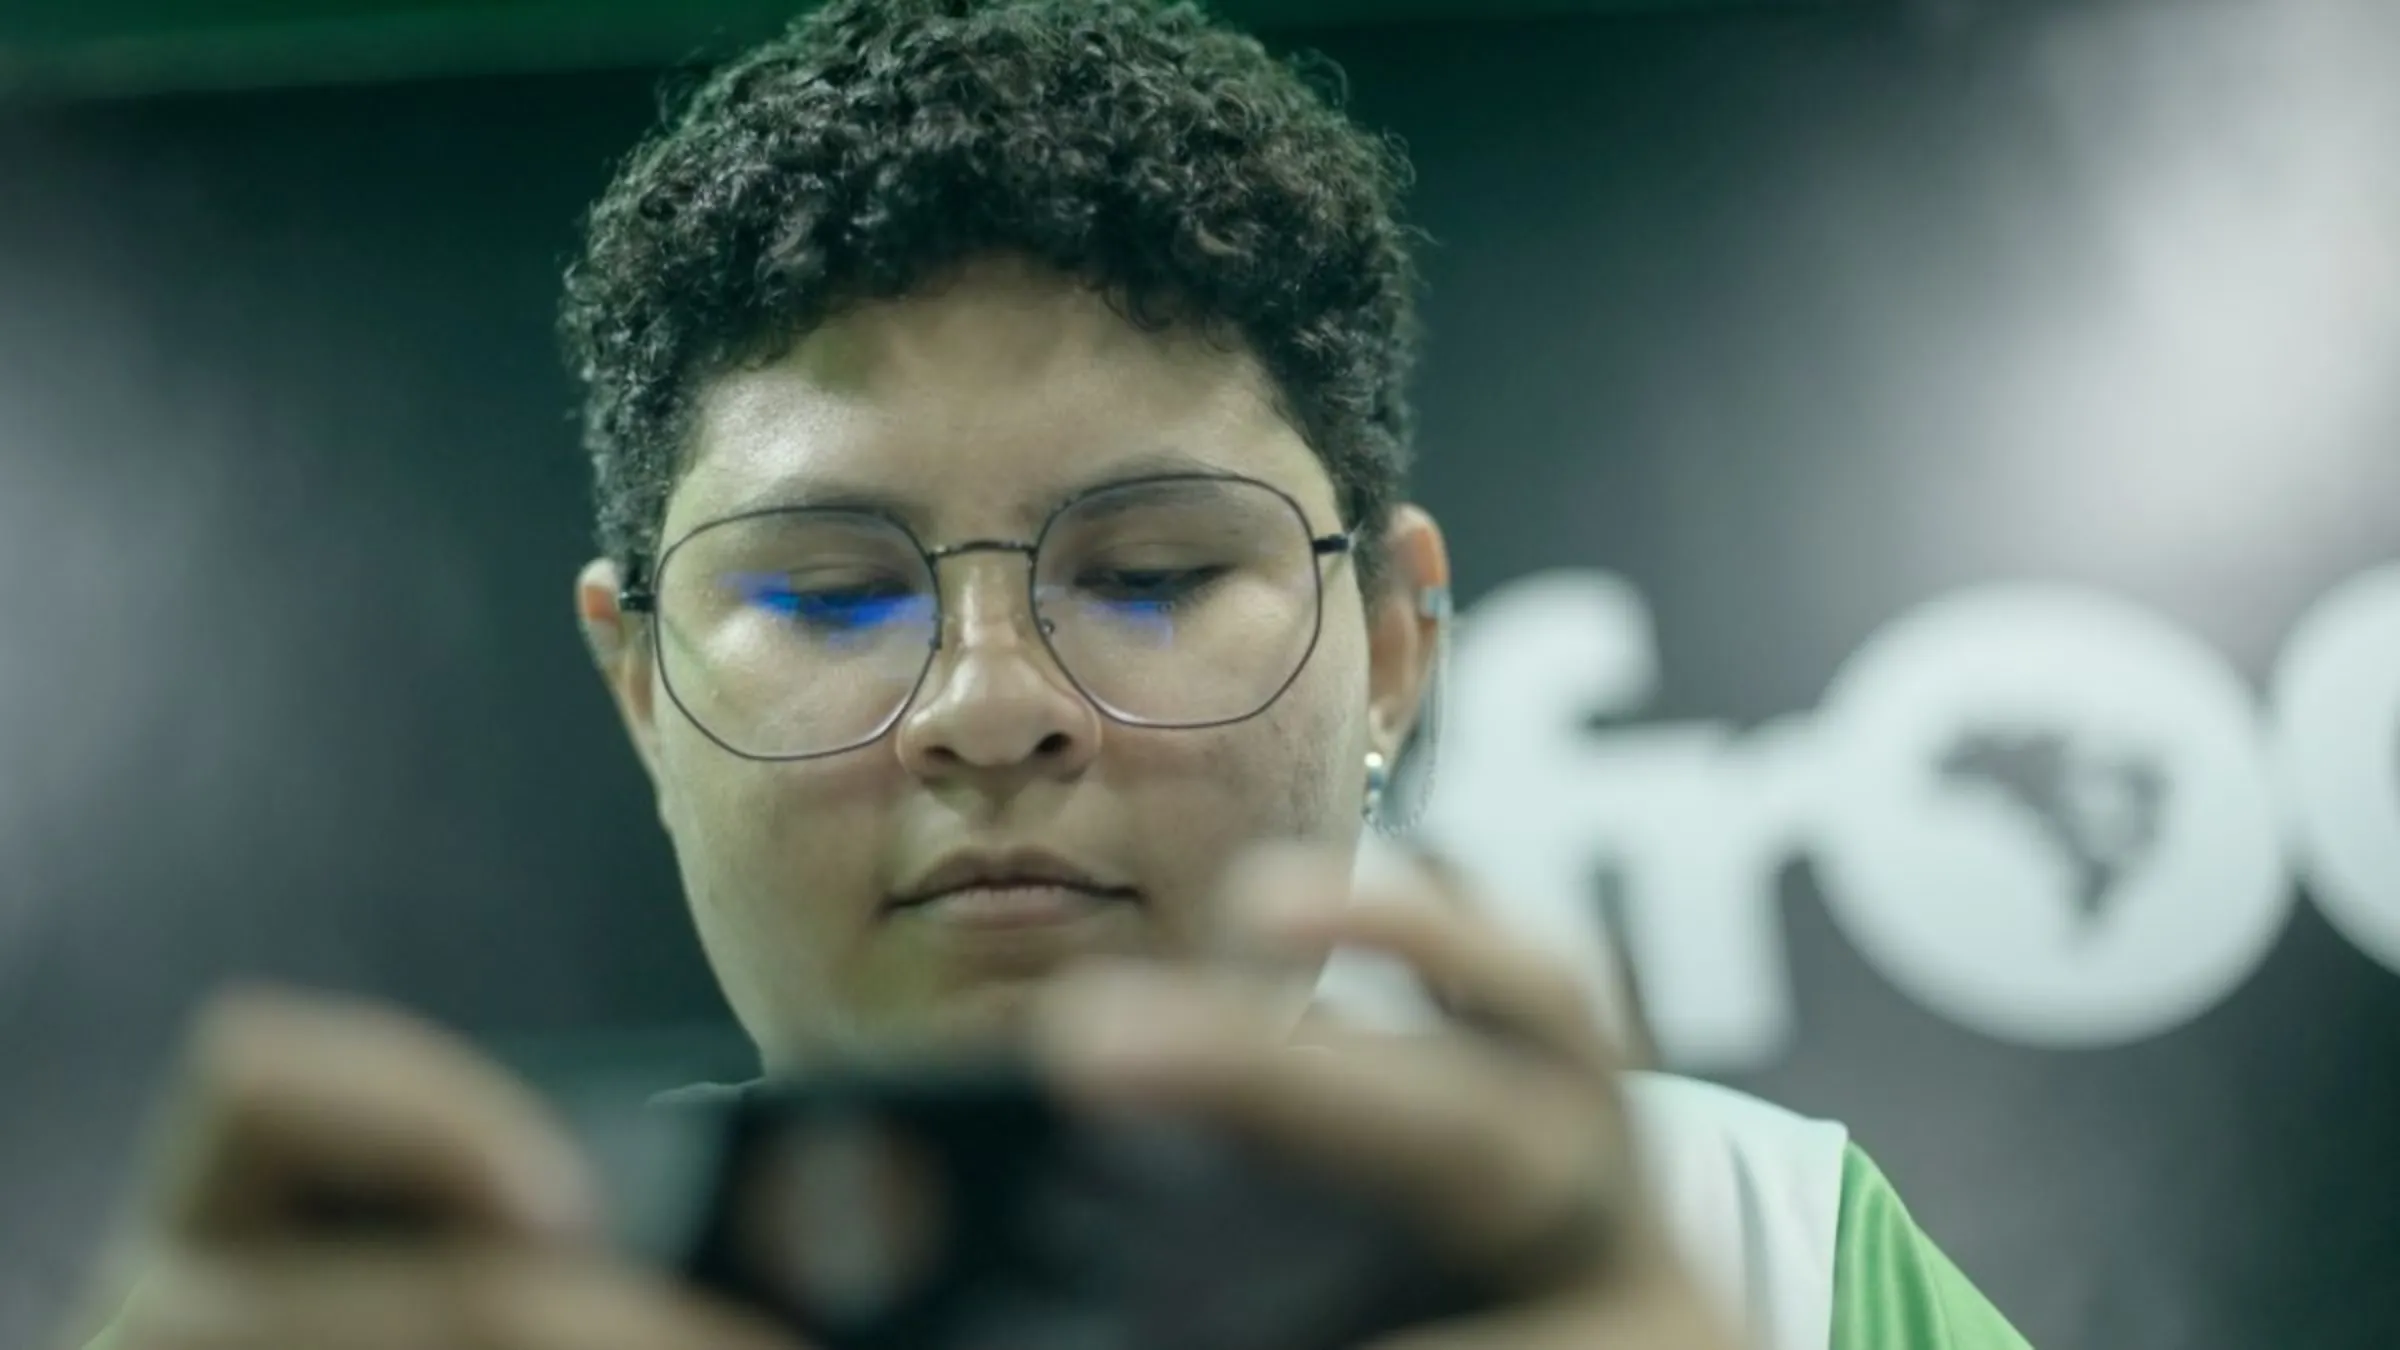 A woman looks at a control for a video game control in this still from the Context video 'Meet the women taking on sexist gaming in Latin America'. Thomson Reuters Foundation/Meghan McDonough